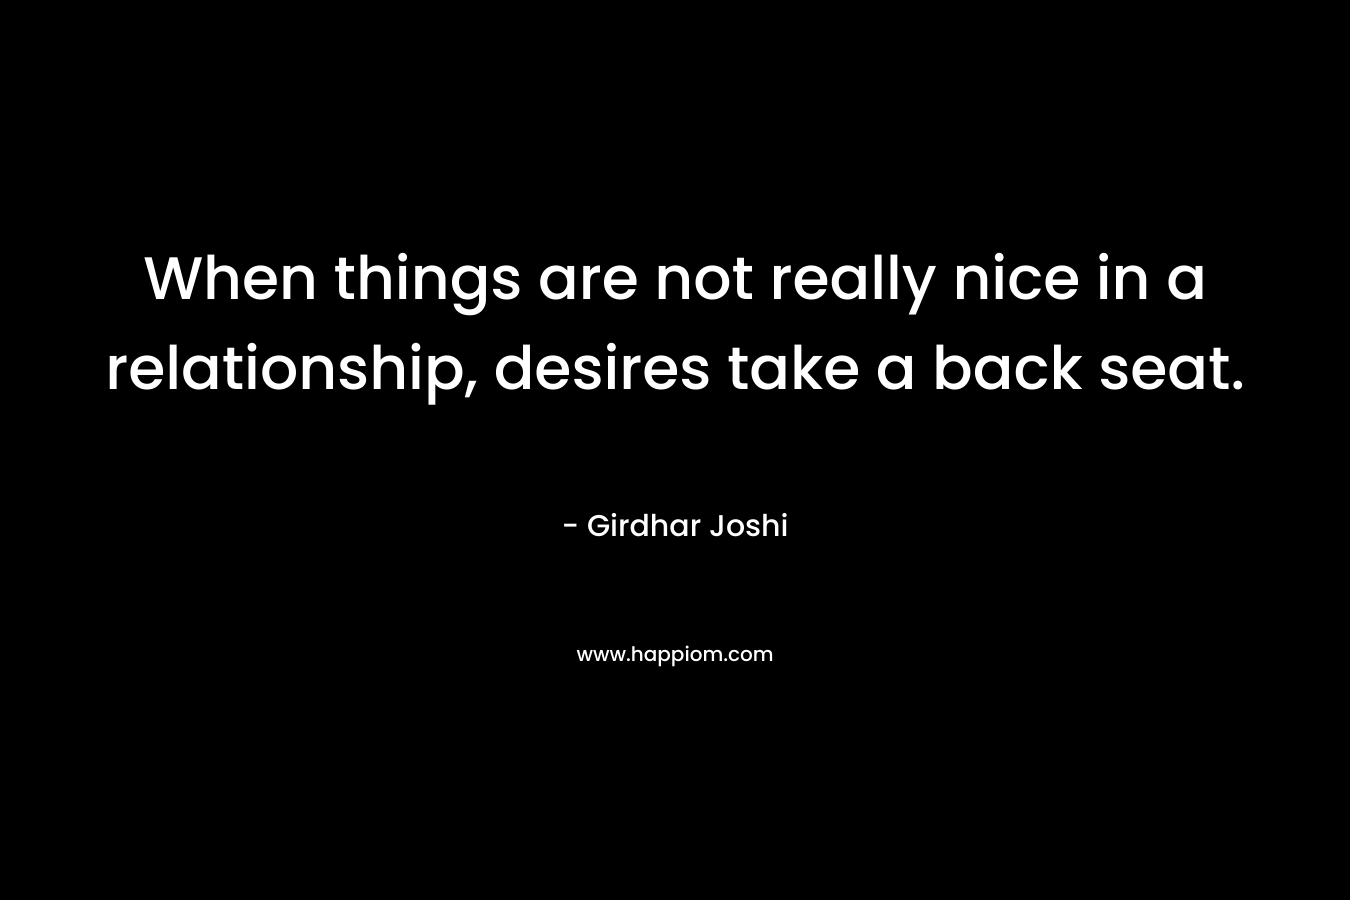 When things are not really nice in a relationship, desires take a back seat.